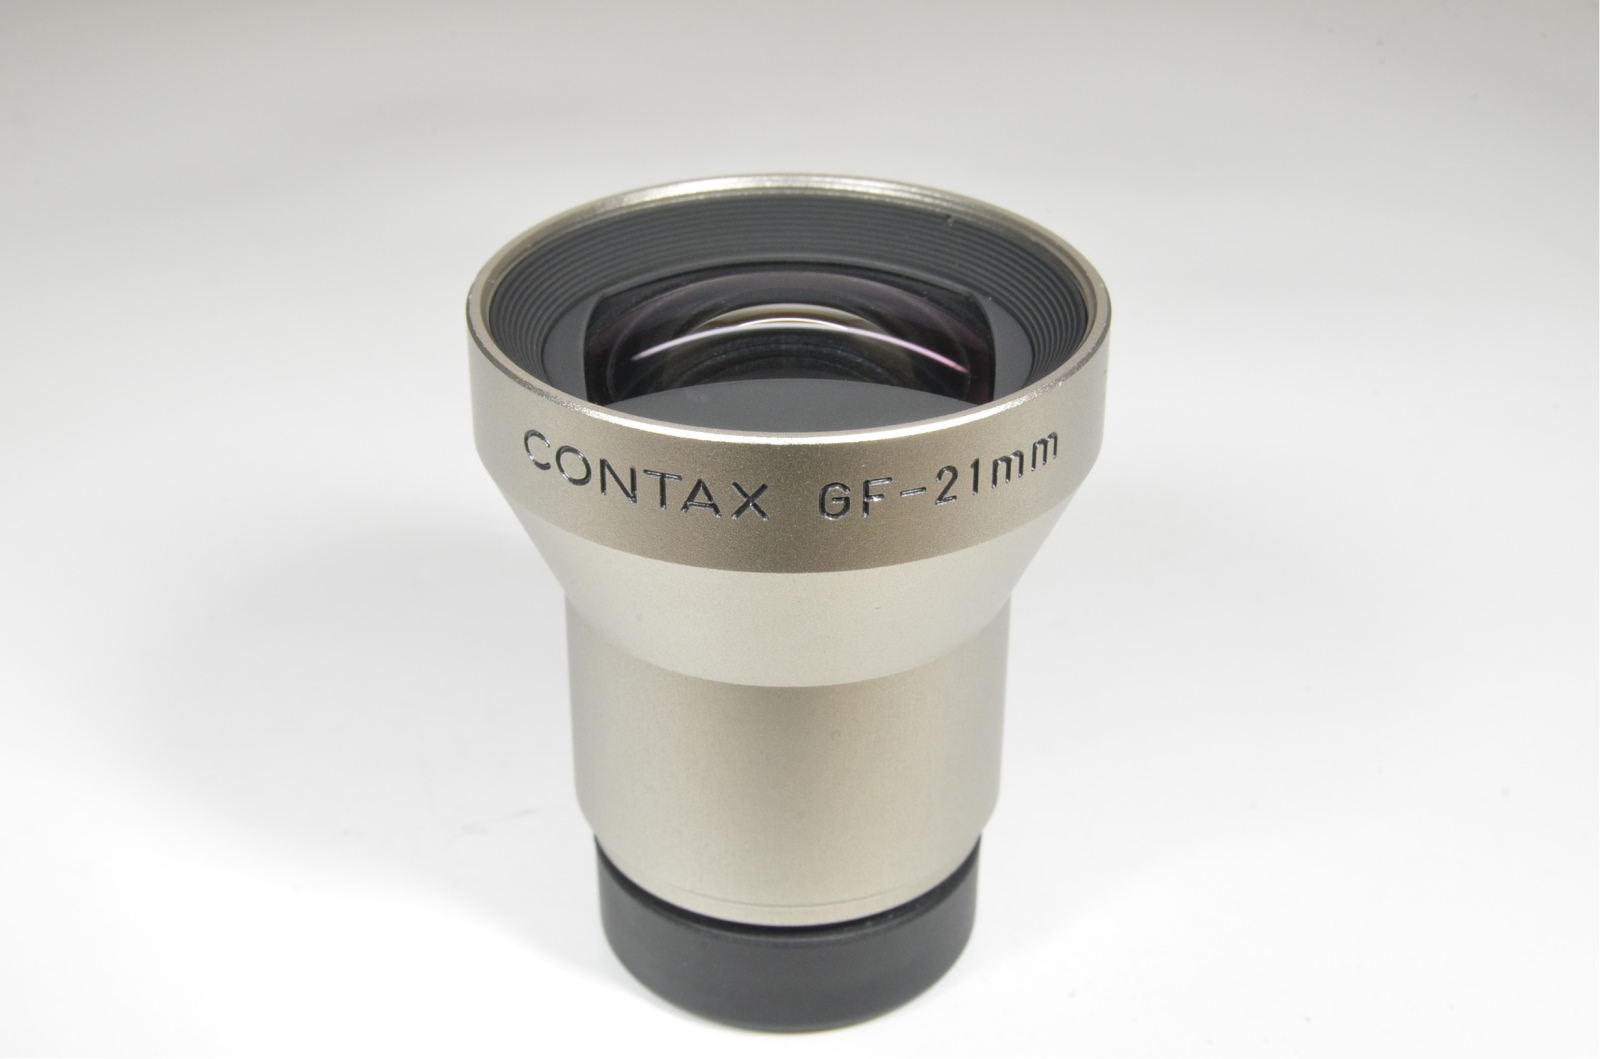 contax carl zeiss t* biogon 21mm f2.8 lens with view finder for g1 g2